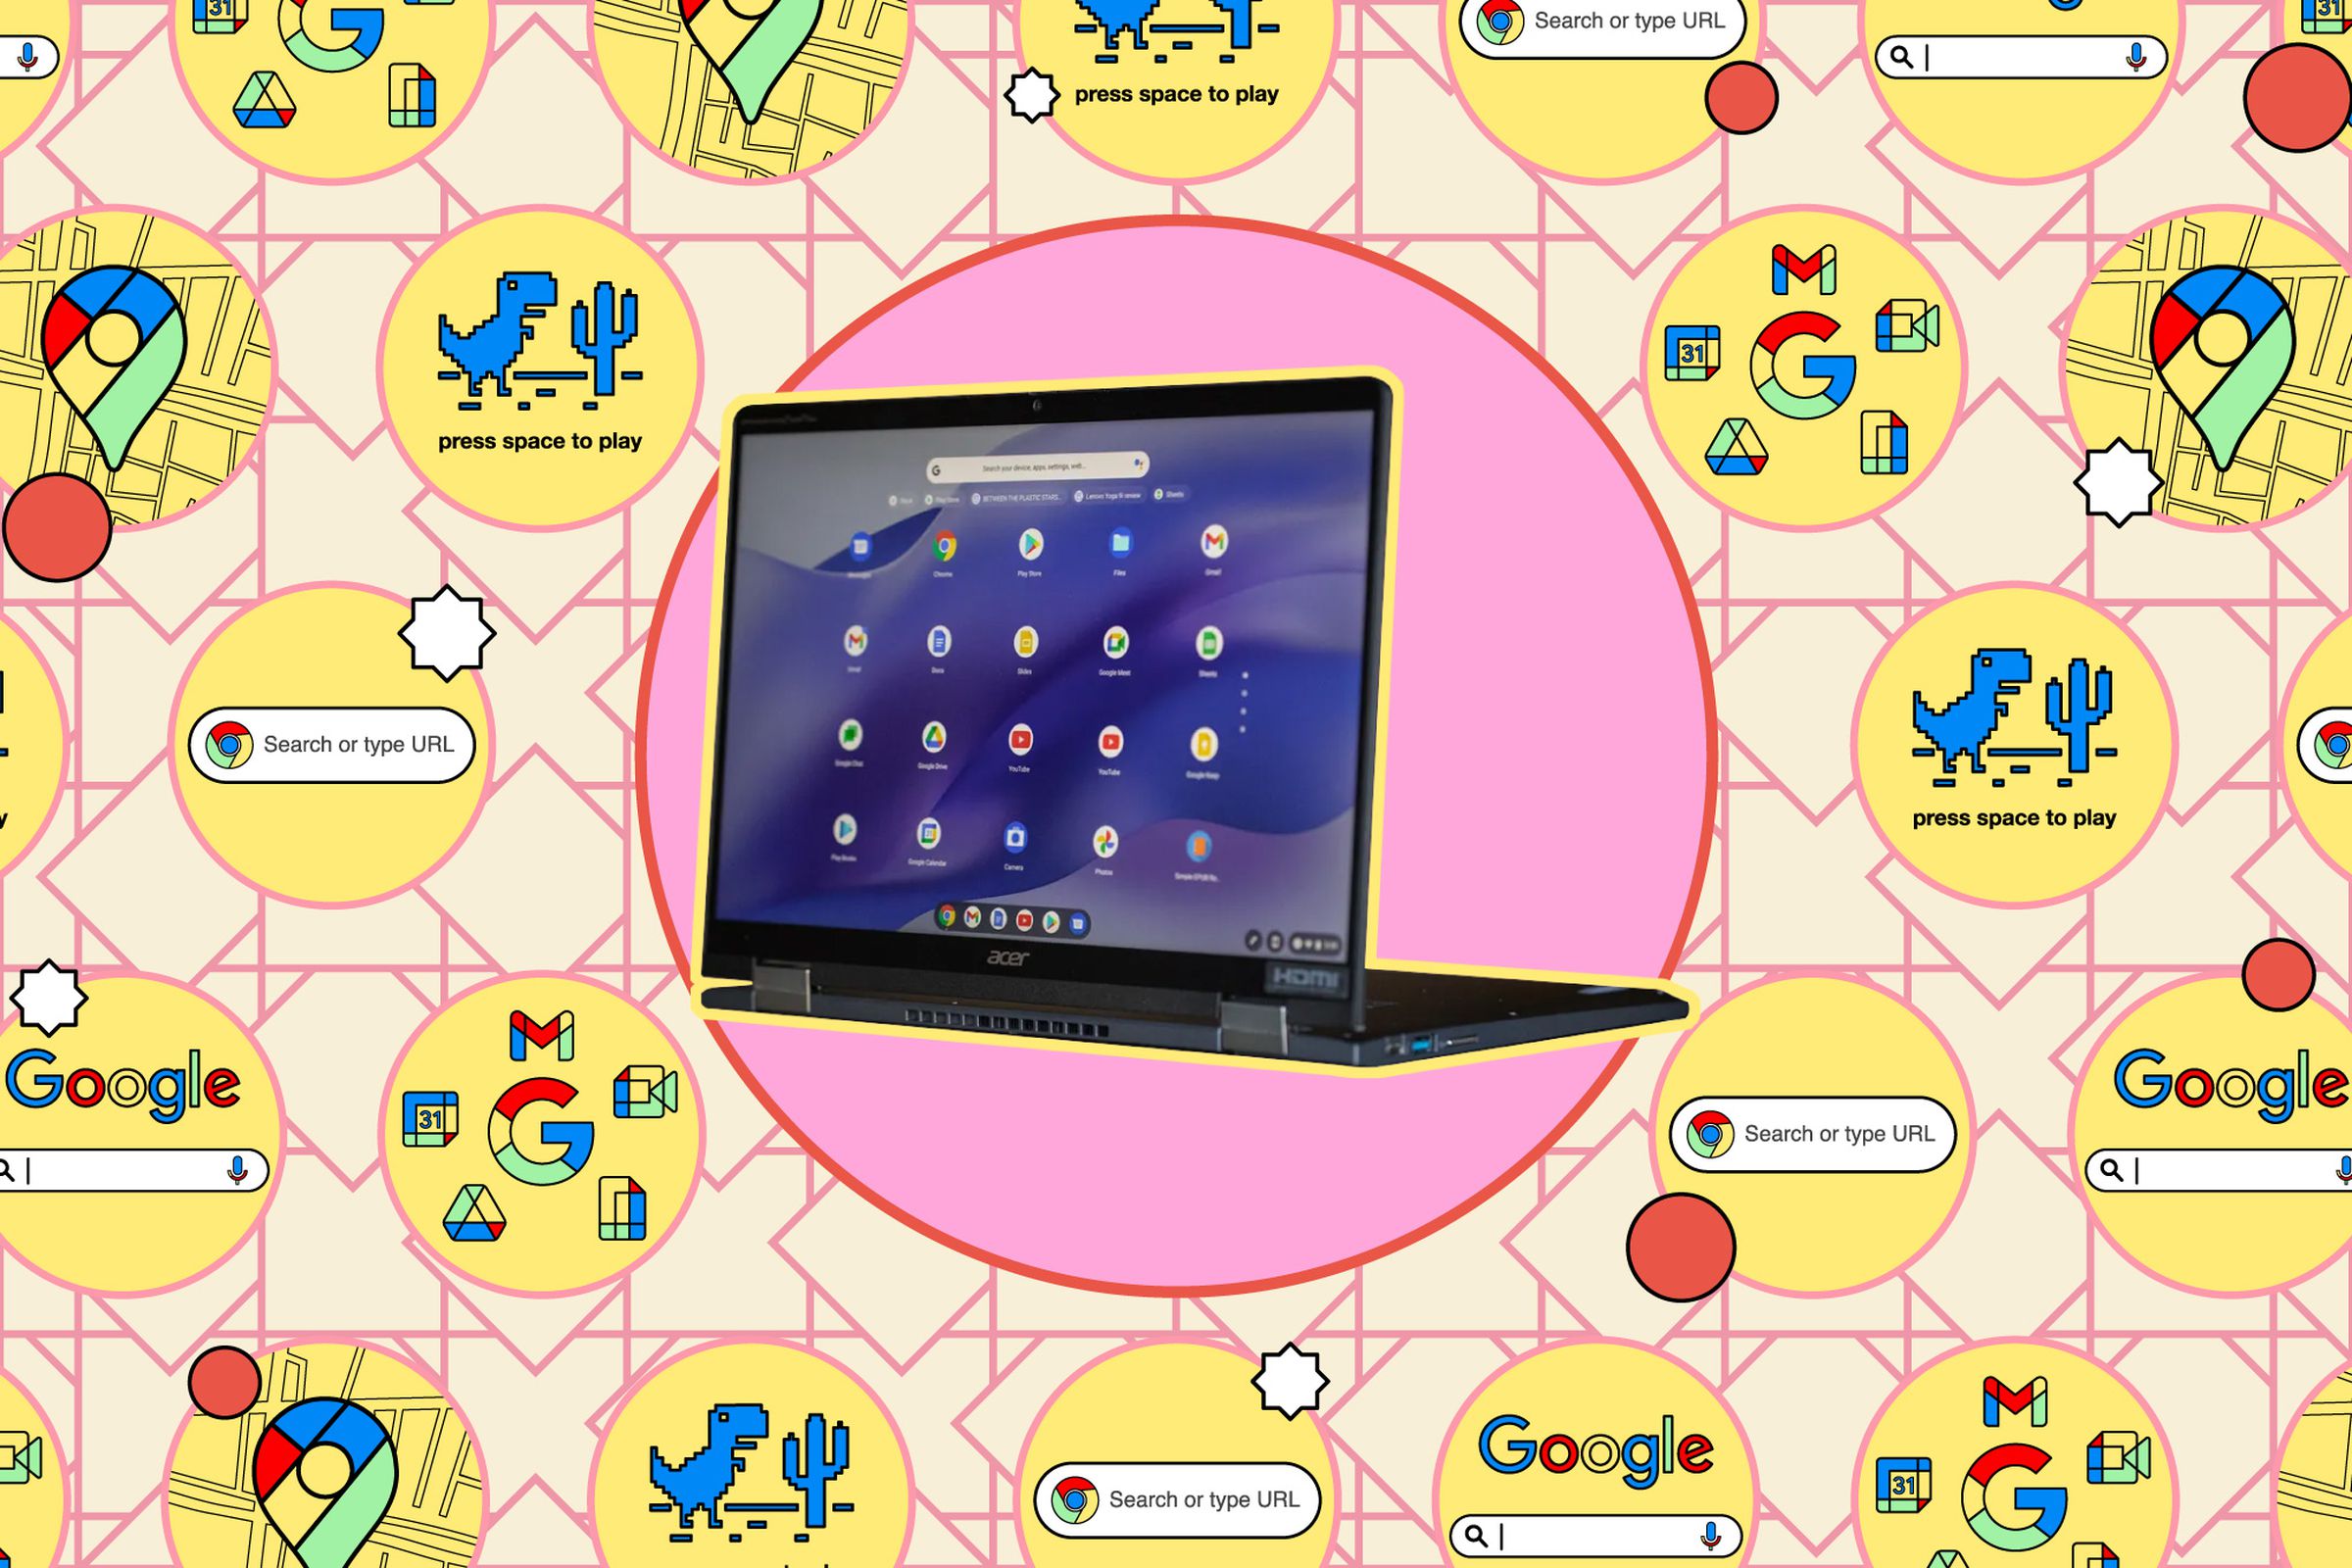 Chromebook in a pink circle against a yellow background with small icons.